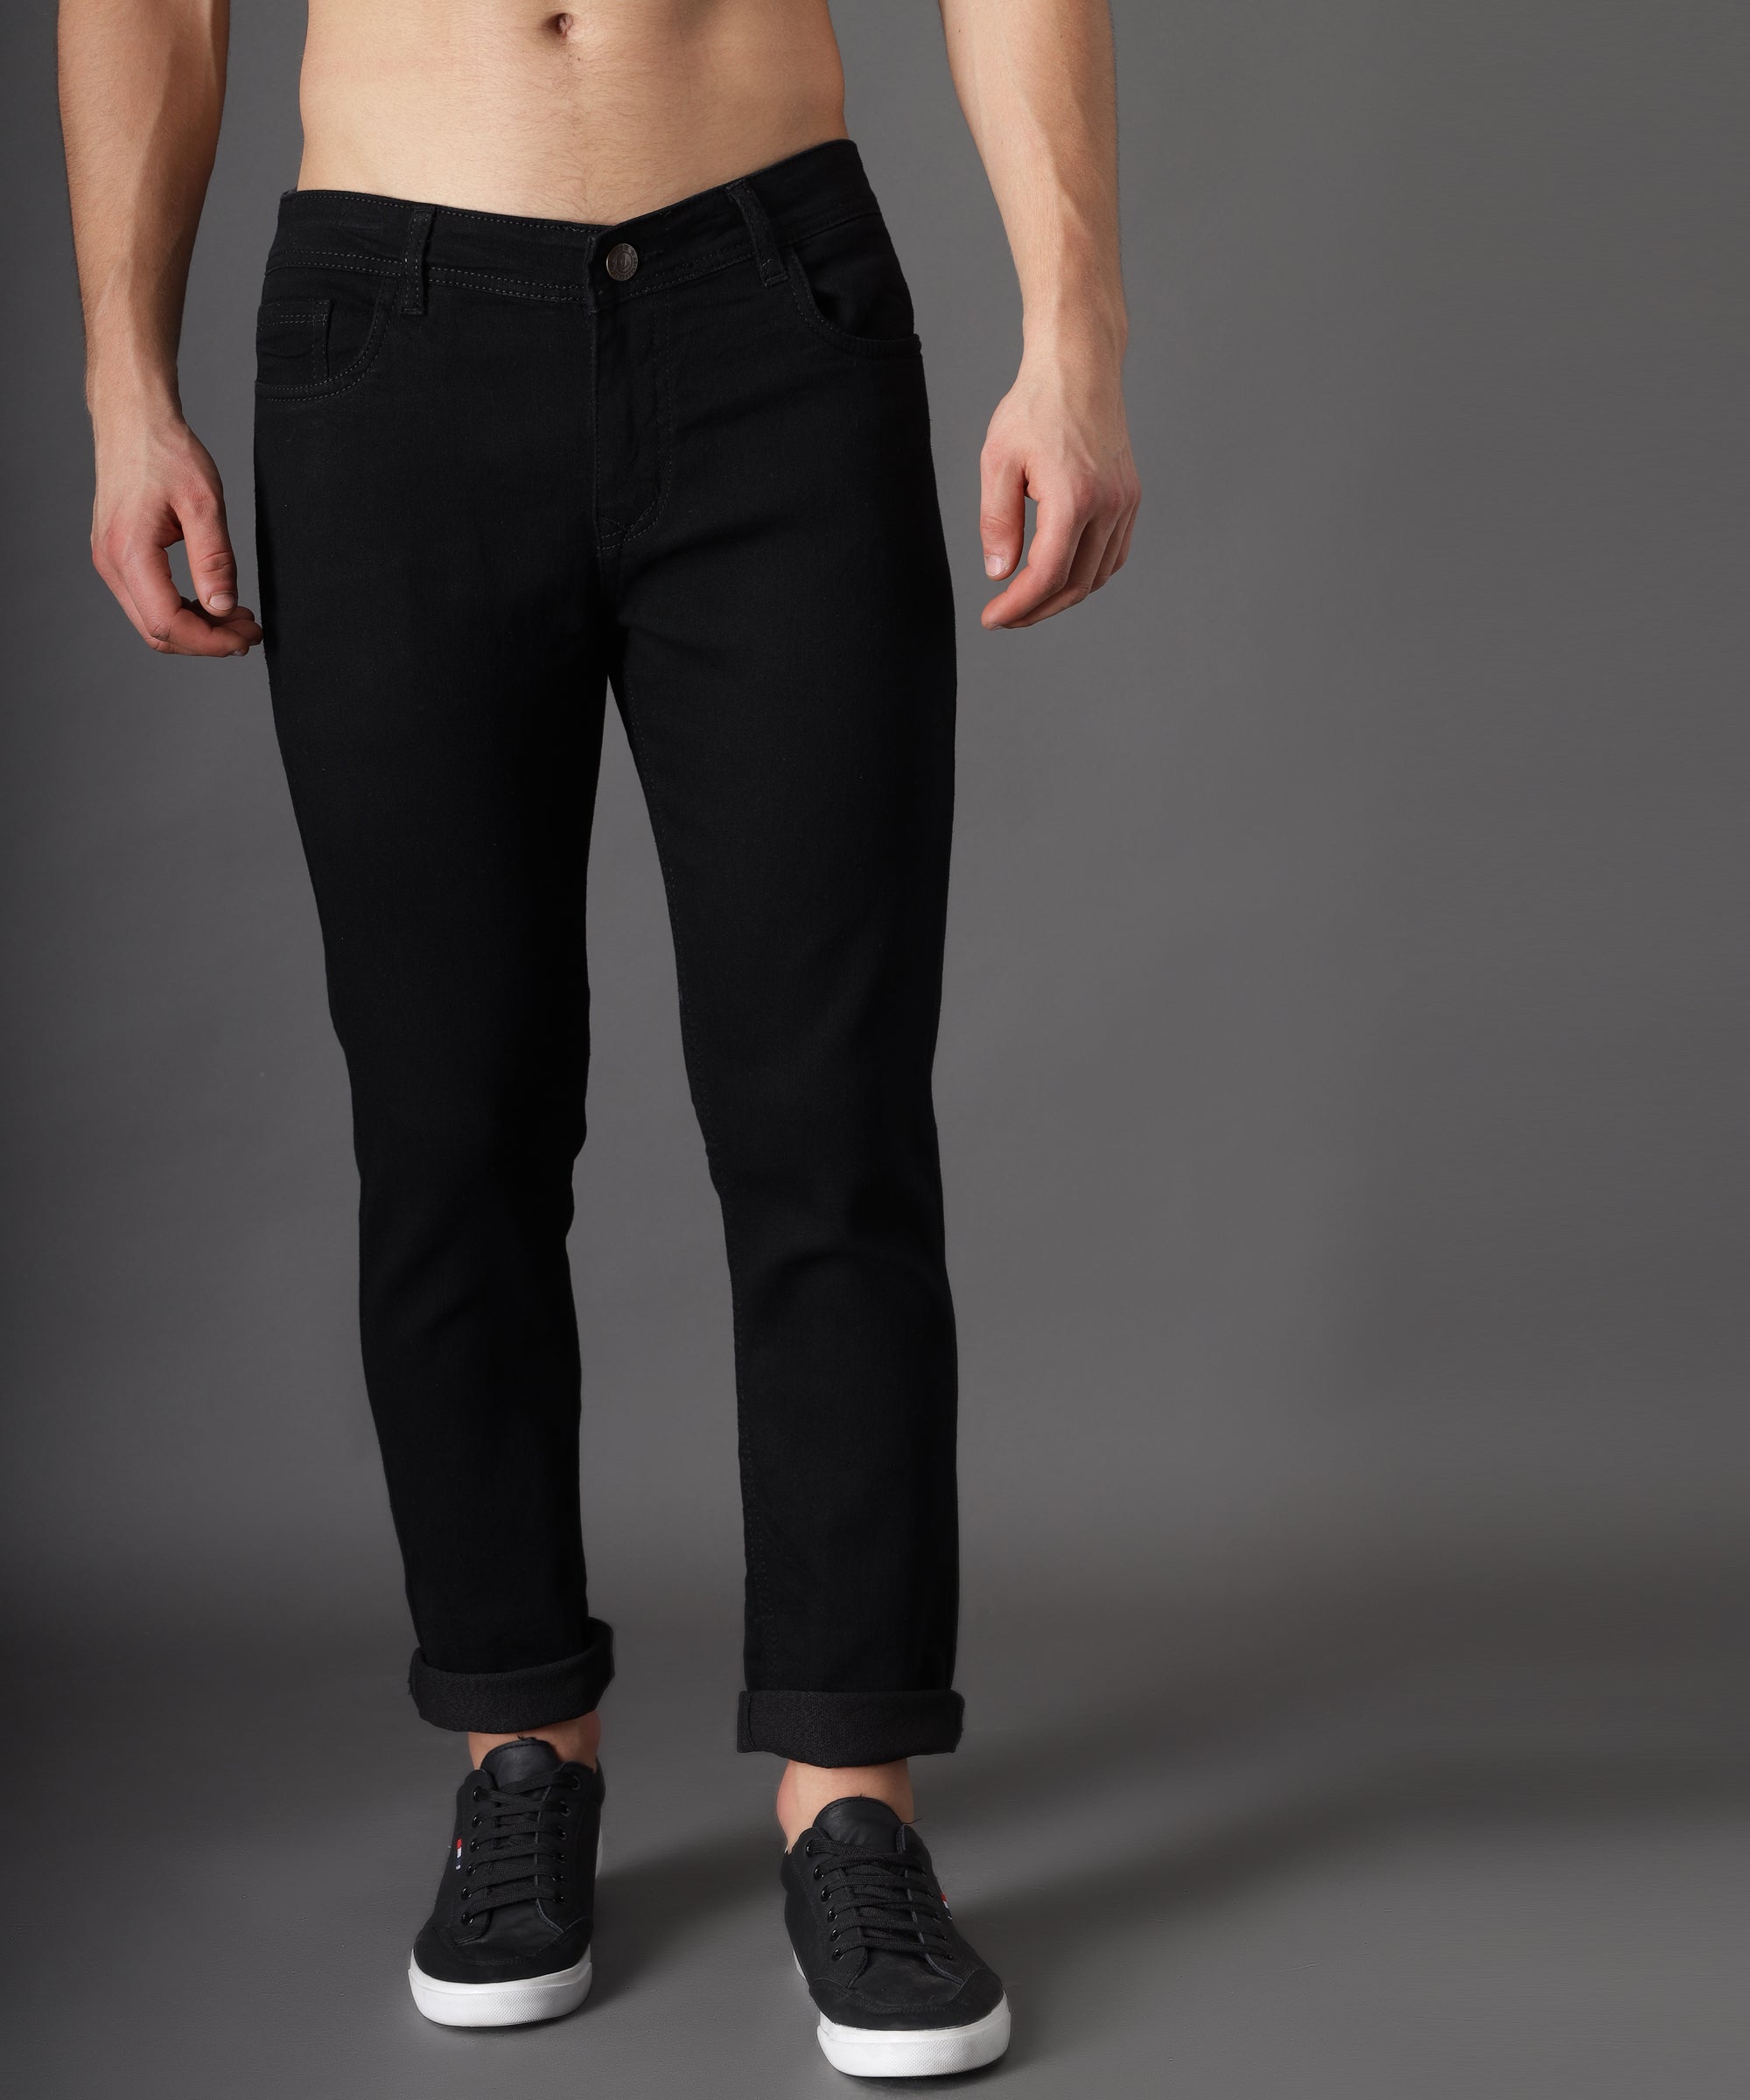 Mens Branded Jeans Trousers - Buy Mens Branded Jeans Trousers online in  India